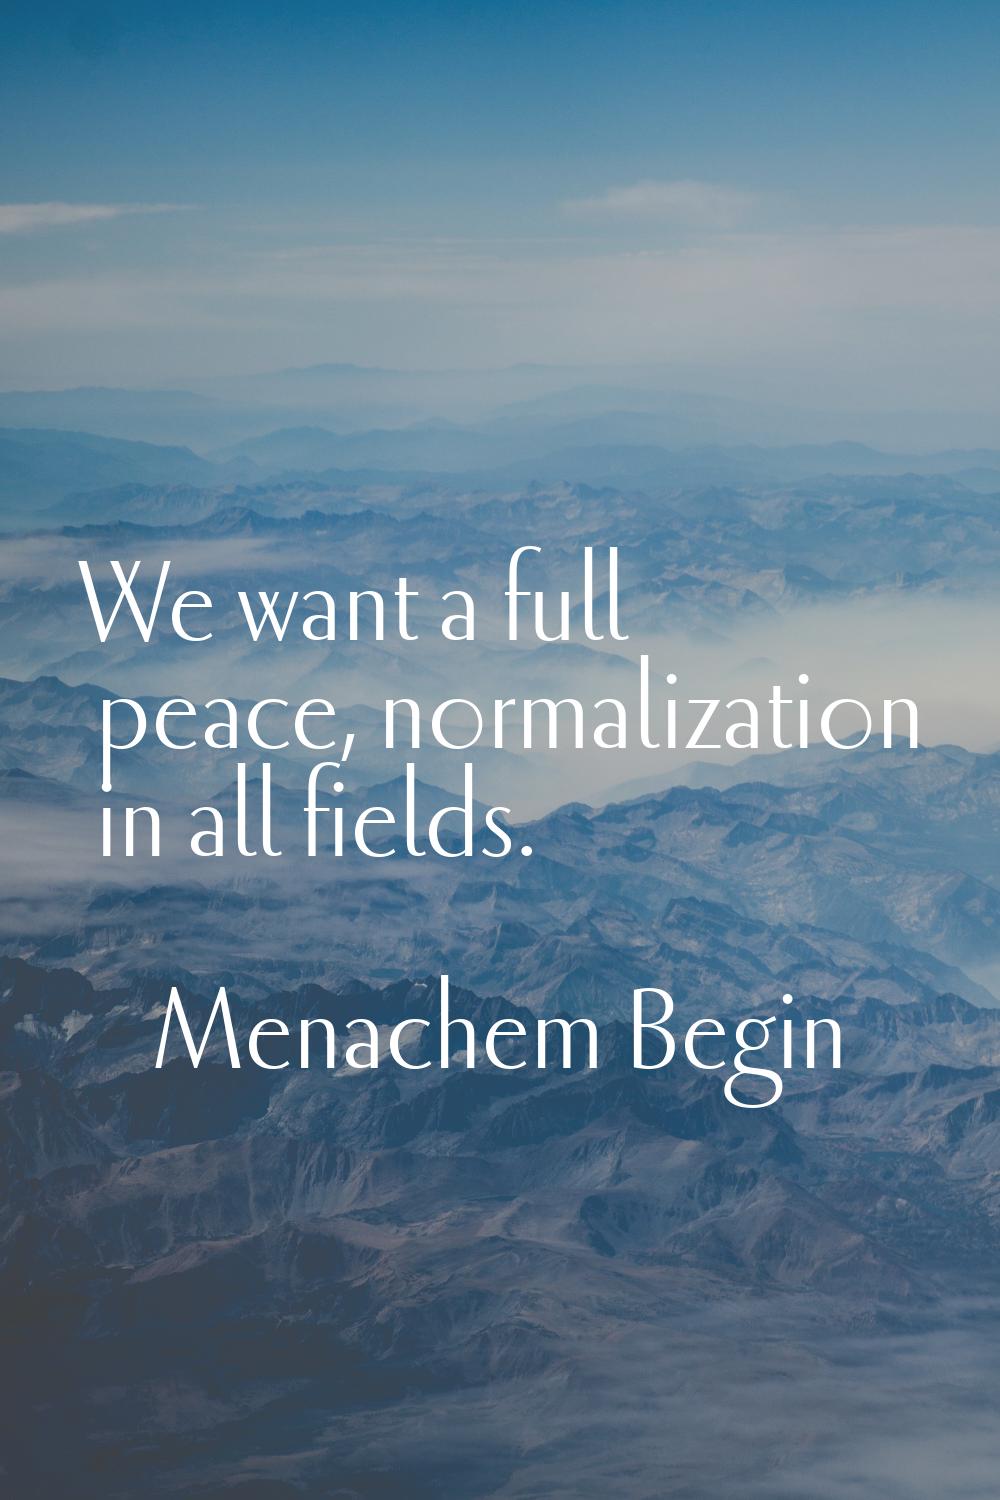 We want a full peace, normalization in all fields.